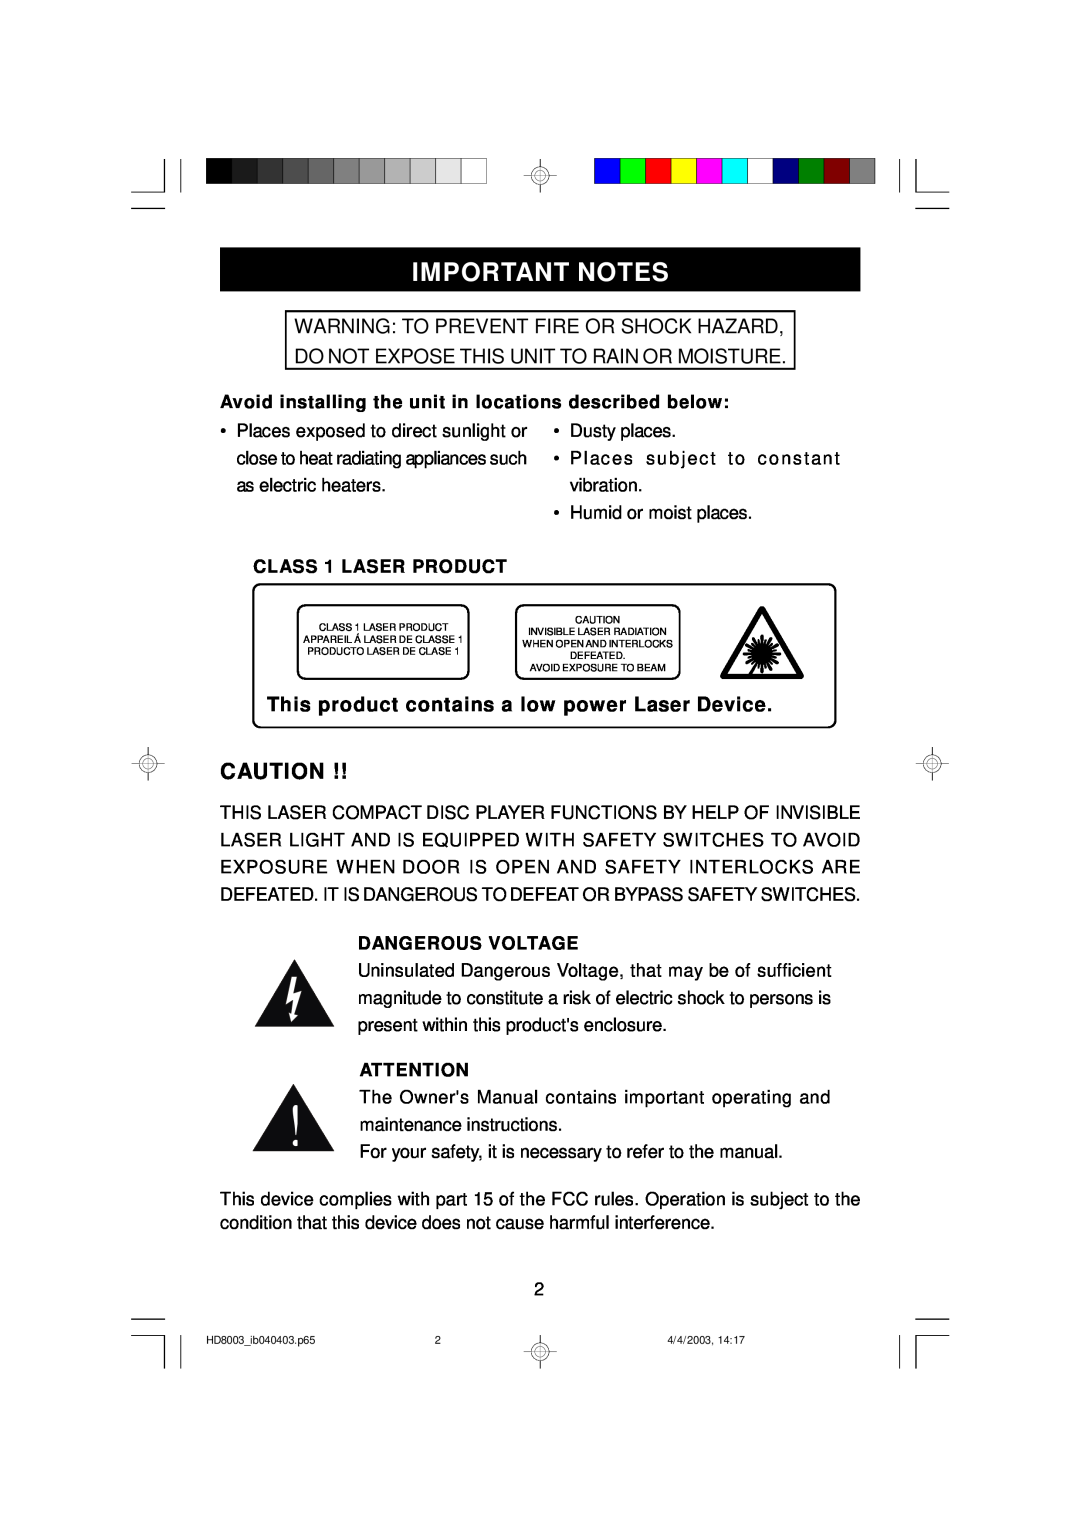 Emerson HD8003 owner manual Important Notes, This product contains a low power Laser Device 